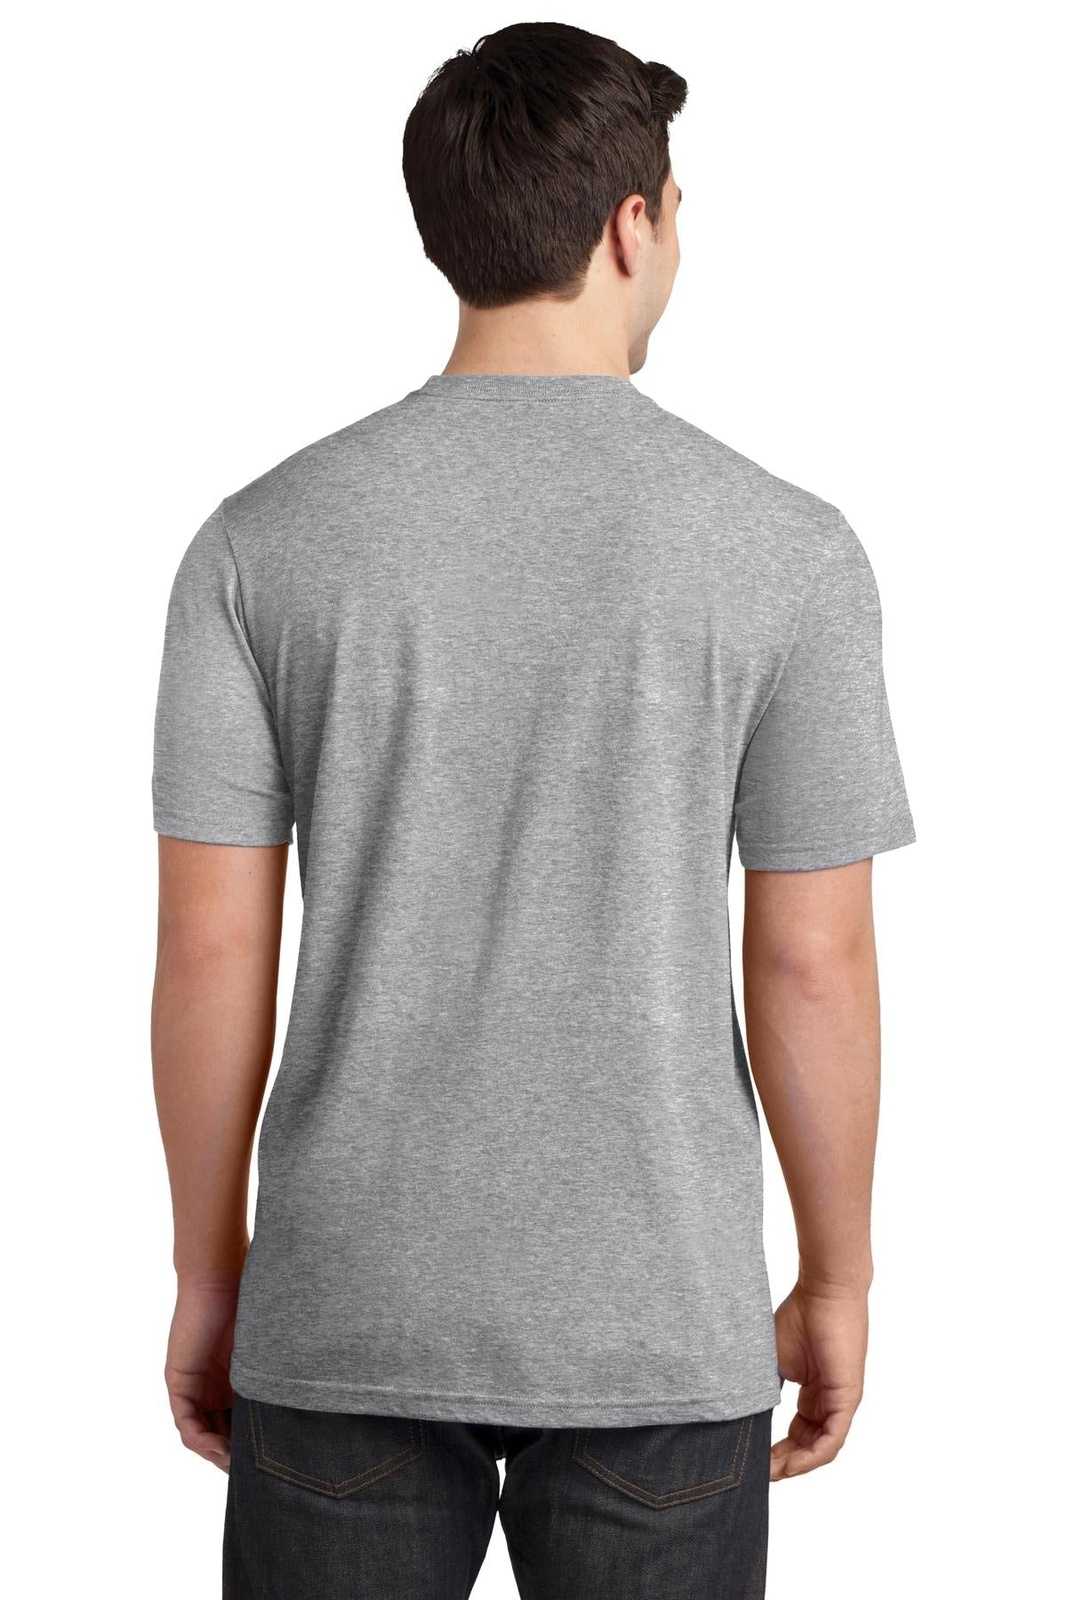 District DT6000P Very Important Tee with Pocket - Light Heather Gray - HIT a Double - 1